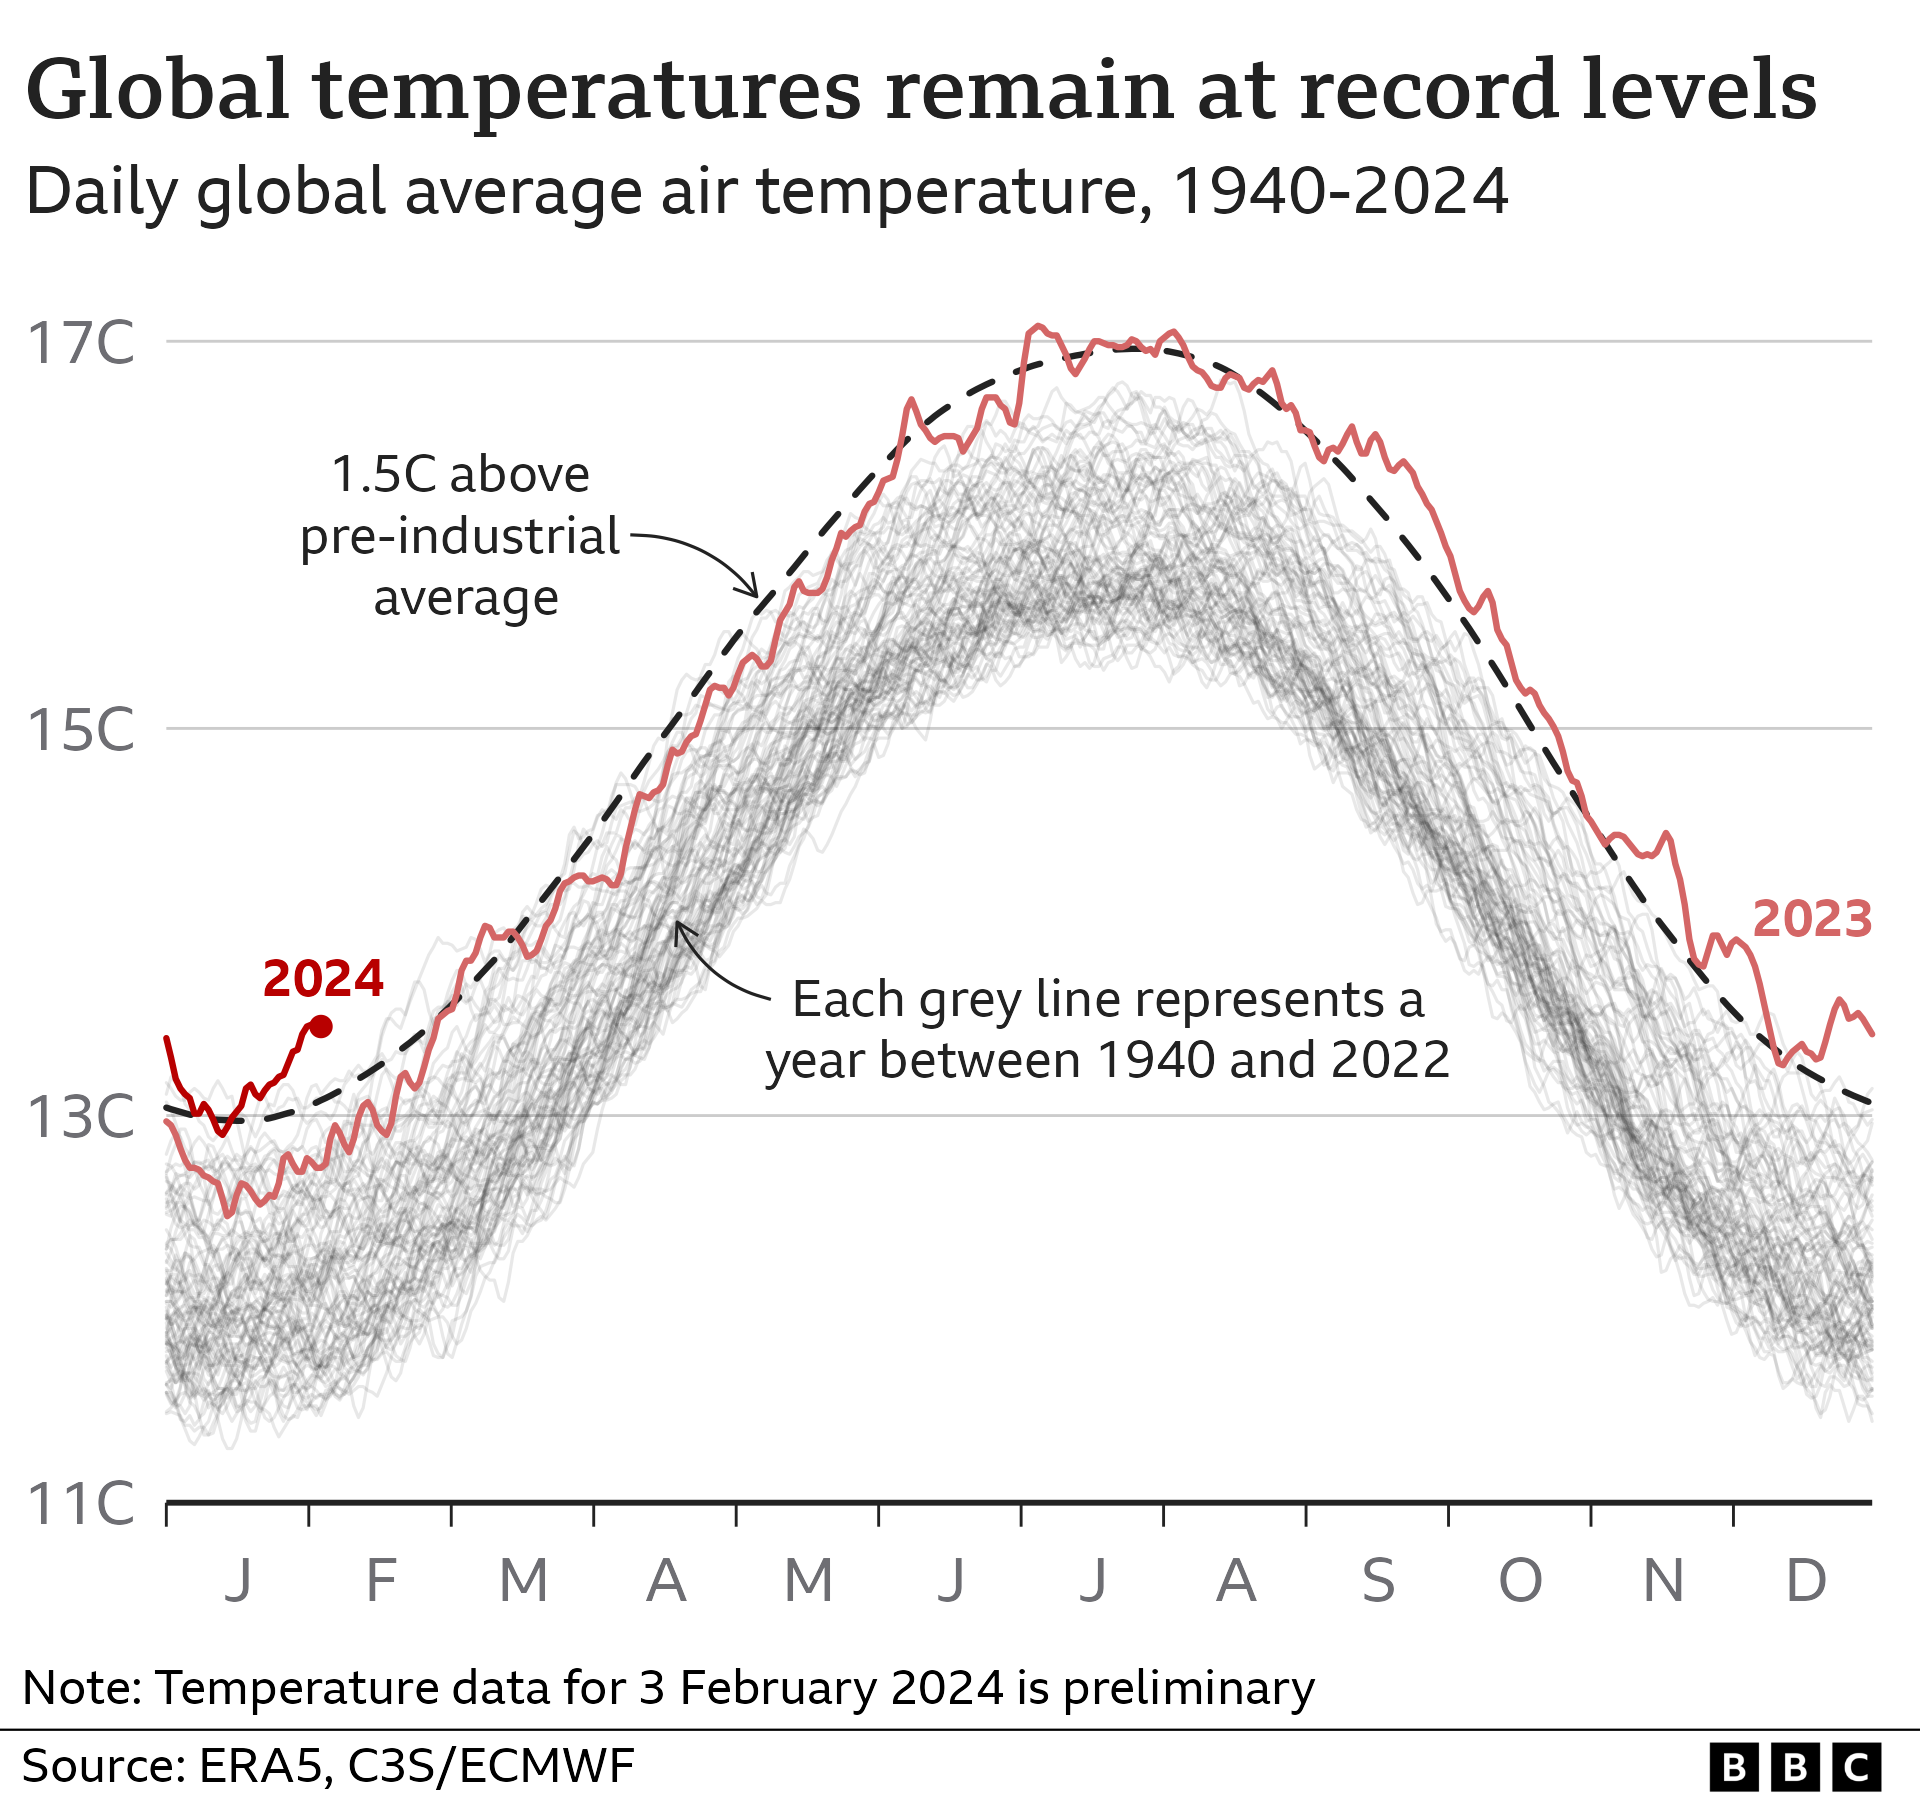 Multiple line graph with average global air temperatures on every day of the year, from 1940 to 2024. Temperatures have exceeded 1.5C above pre-industrial levels on almost every day since the middle of 2023, and this has continued into 2024.